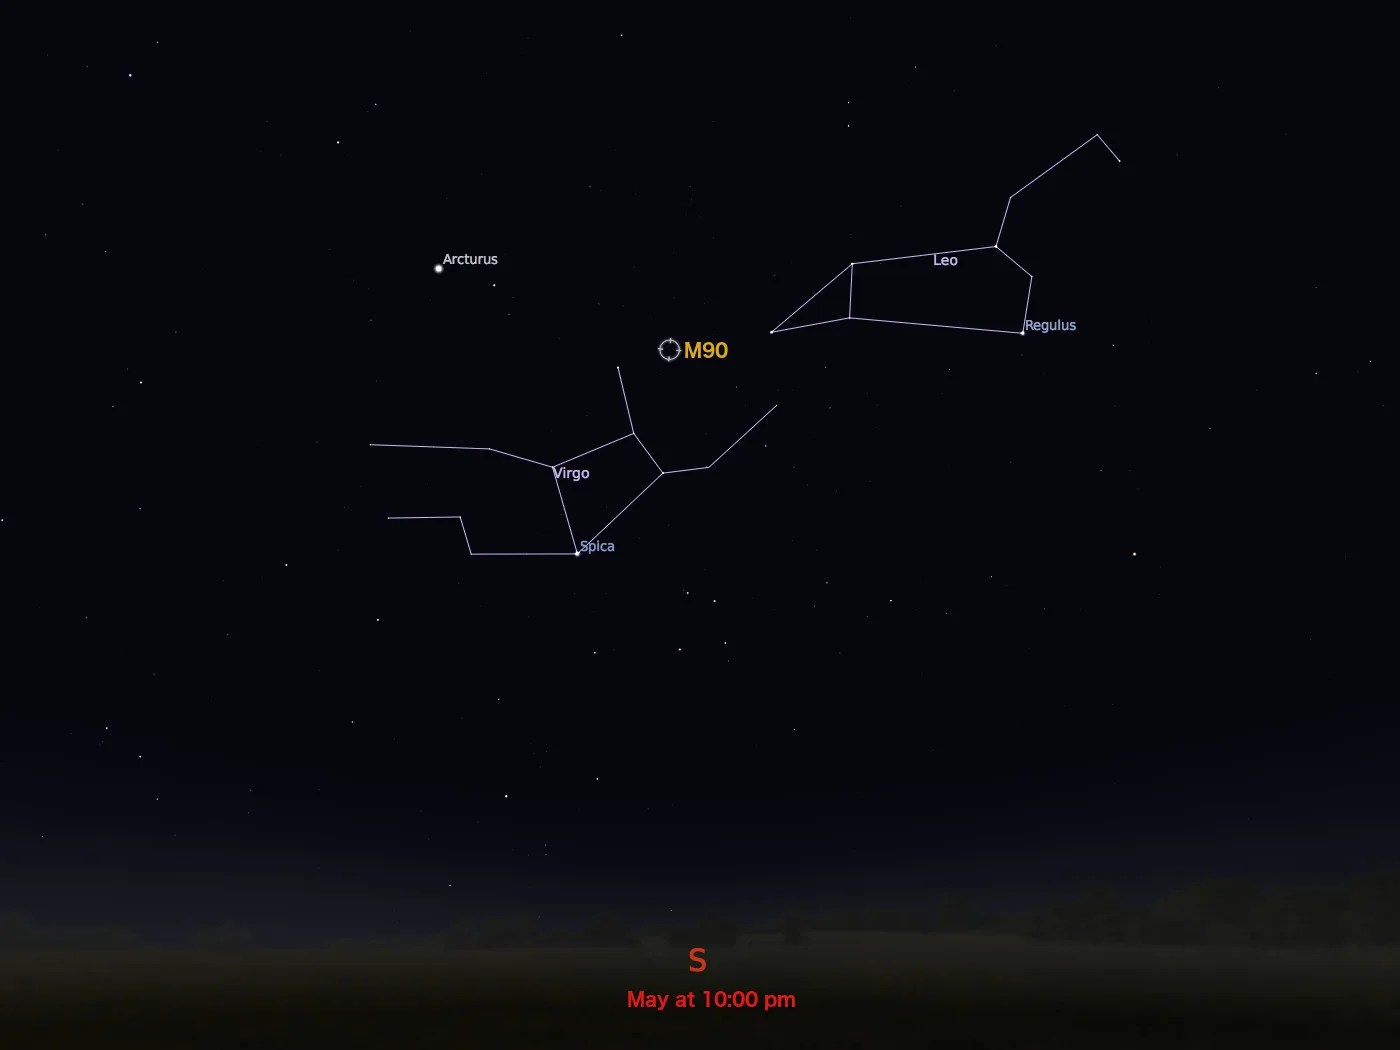 star chart showing location in night sky of M90